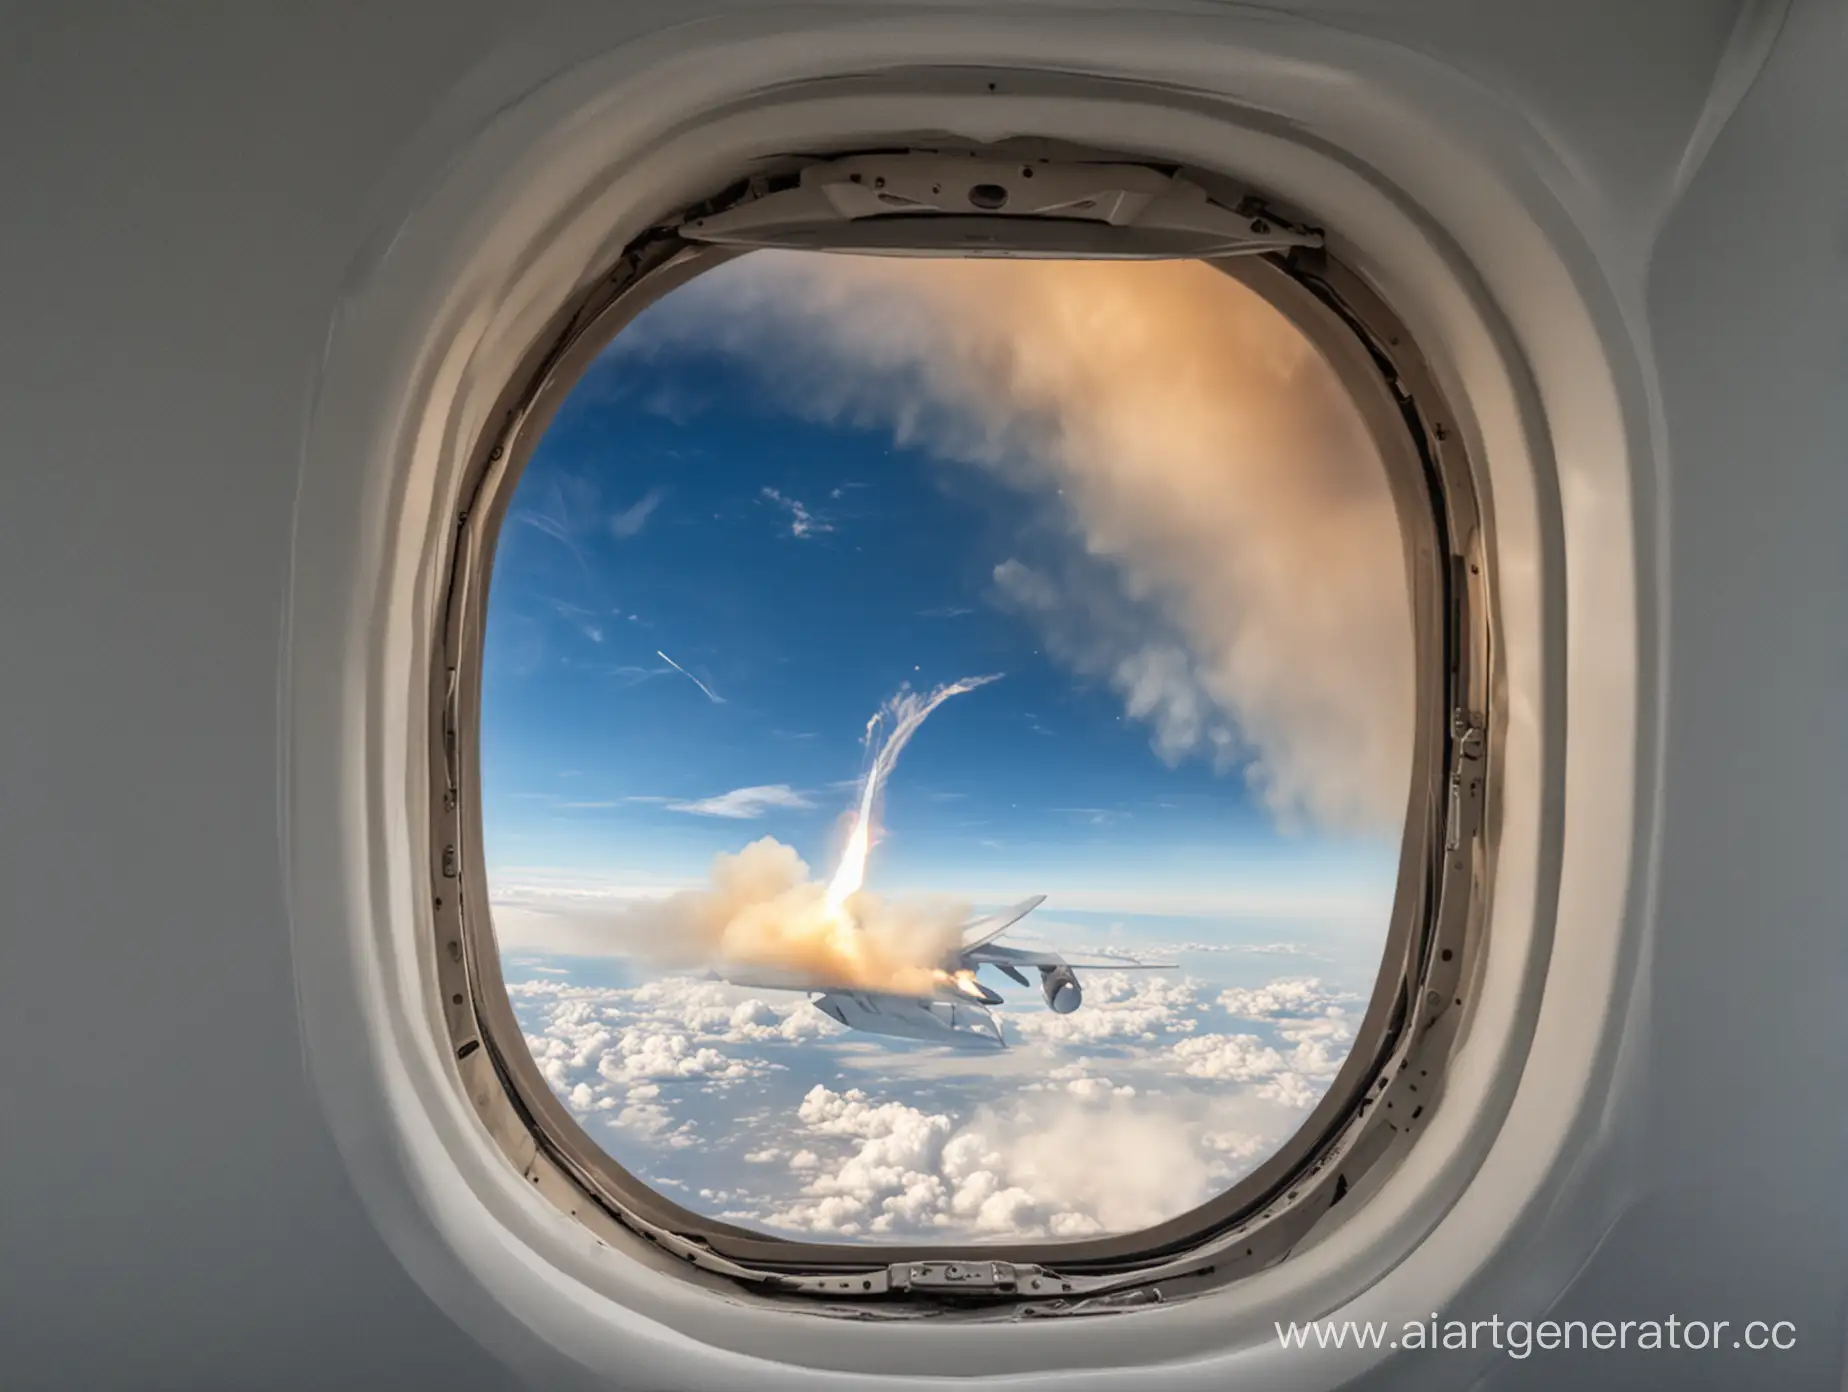 Aircraft-Window-View-Clouds-and-Engine-Fire